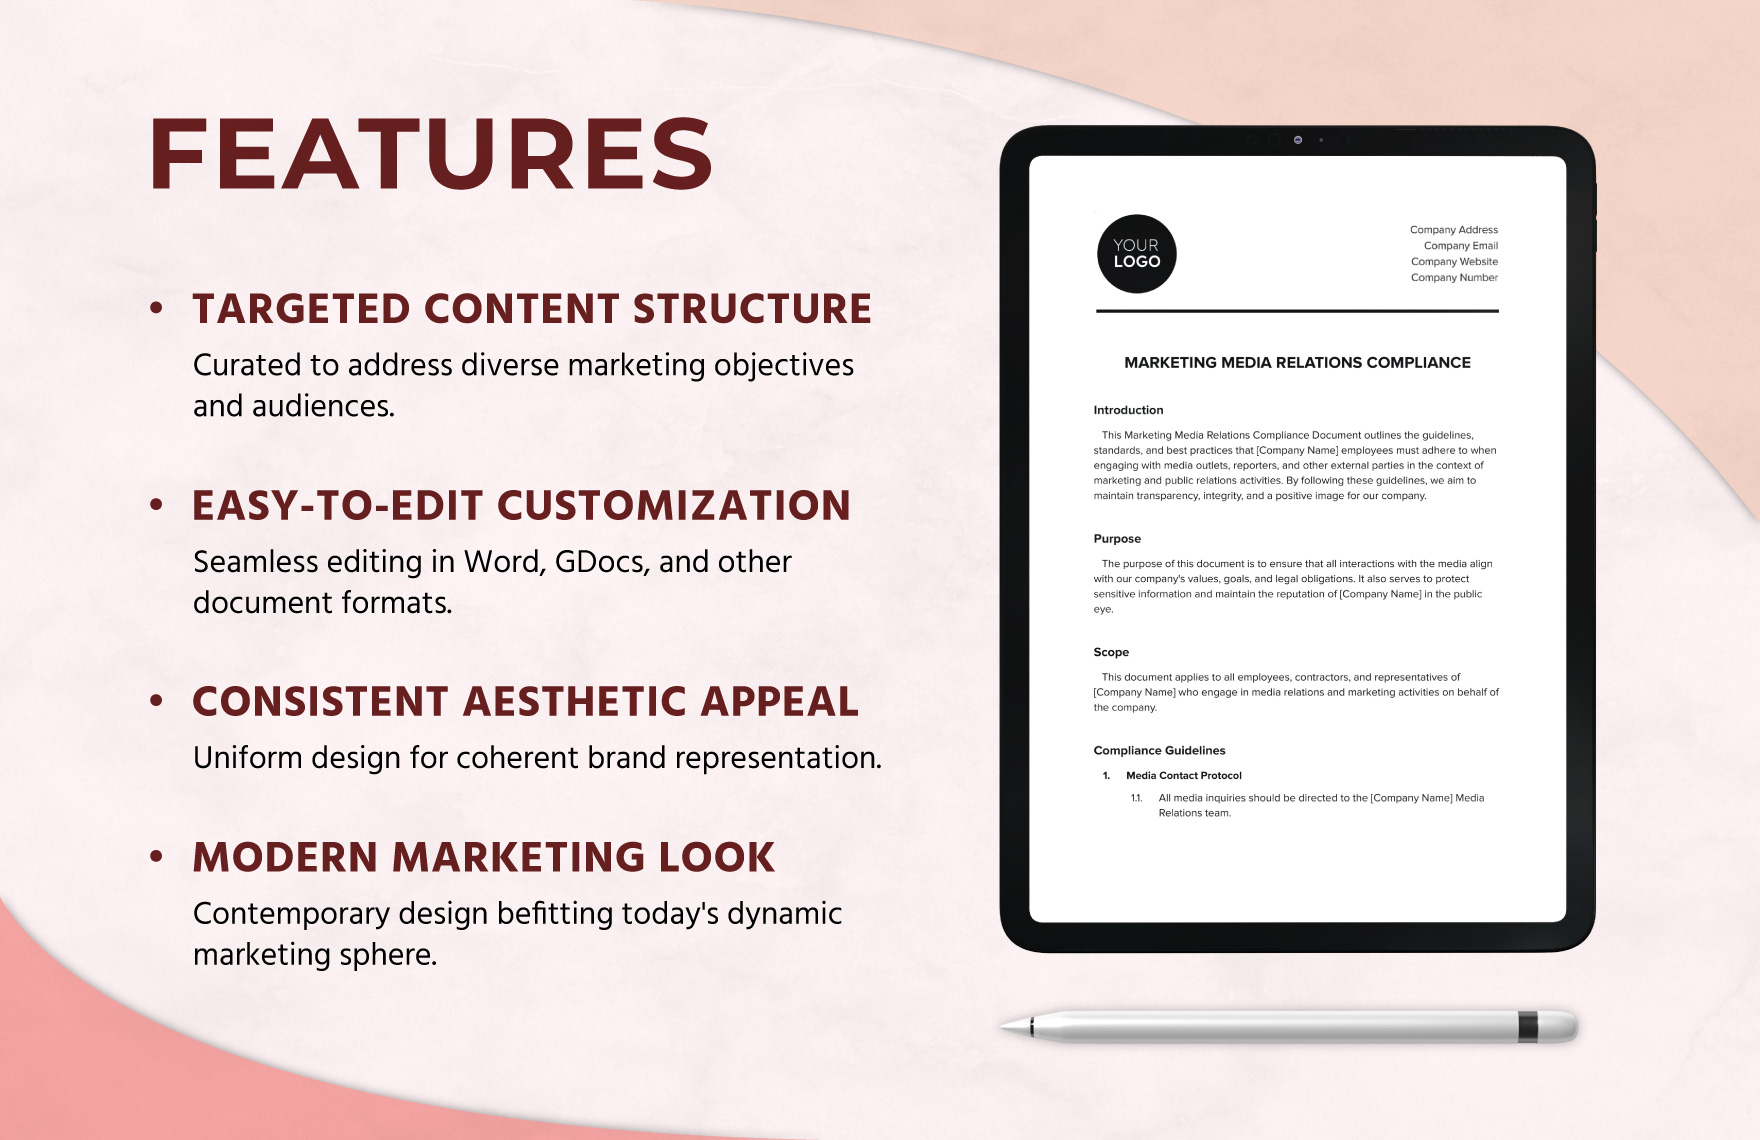 Marketing Media Relations Compliance Template